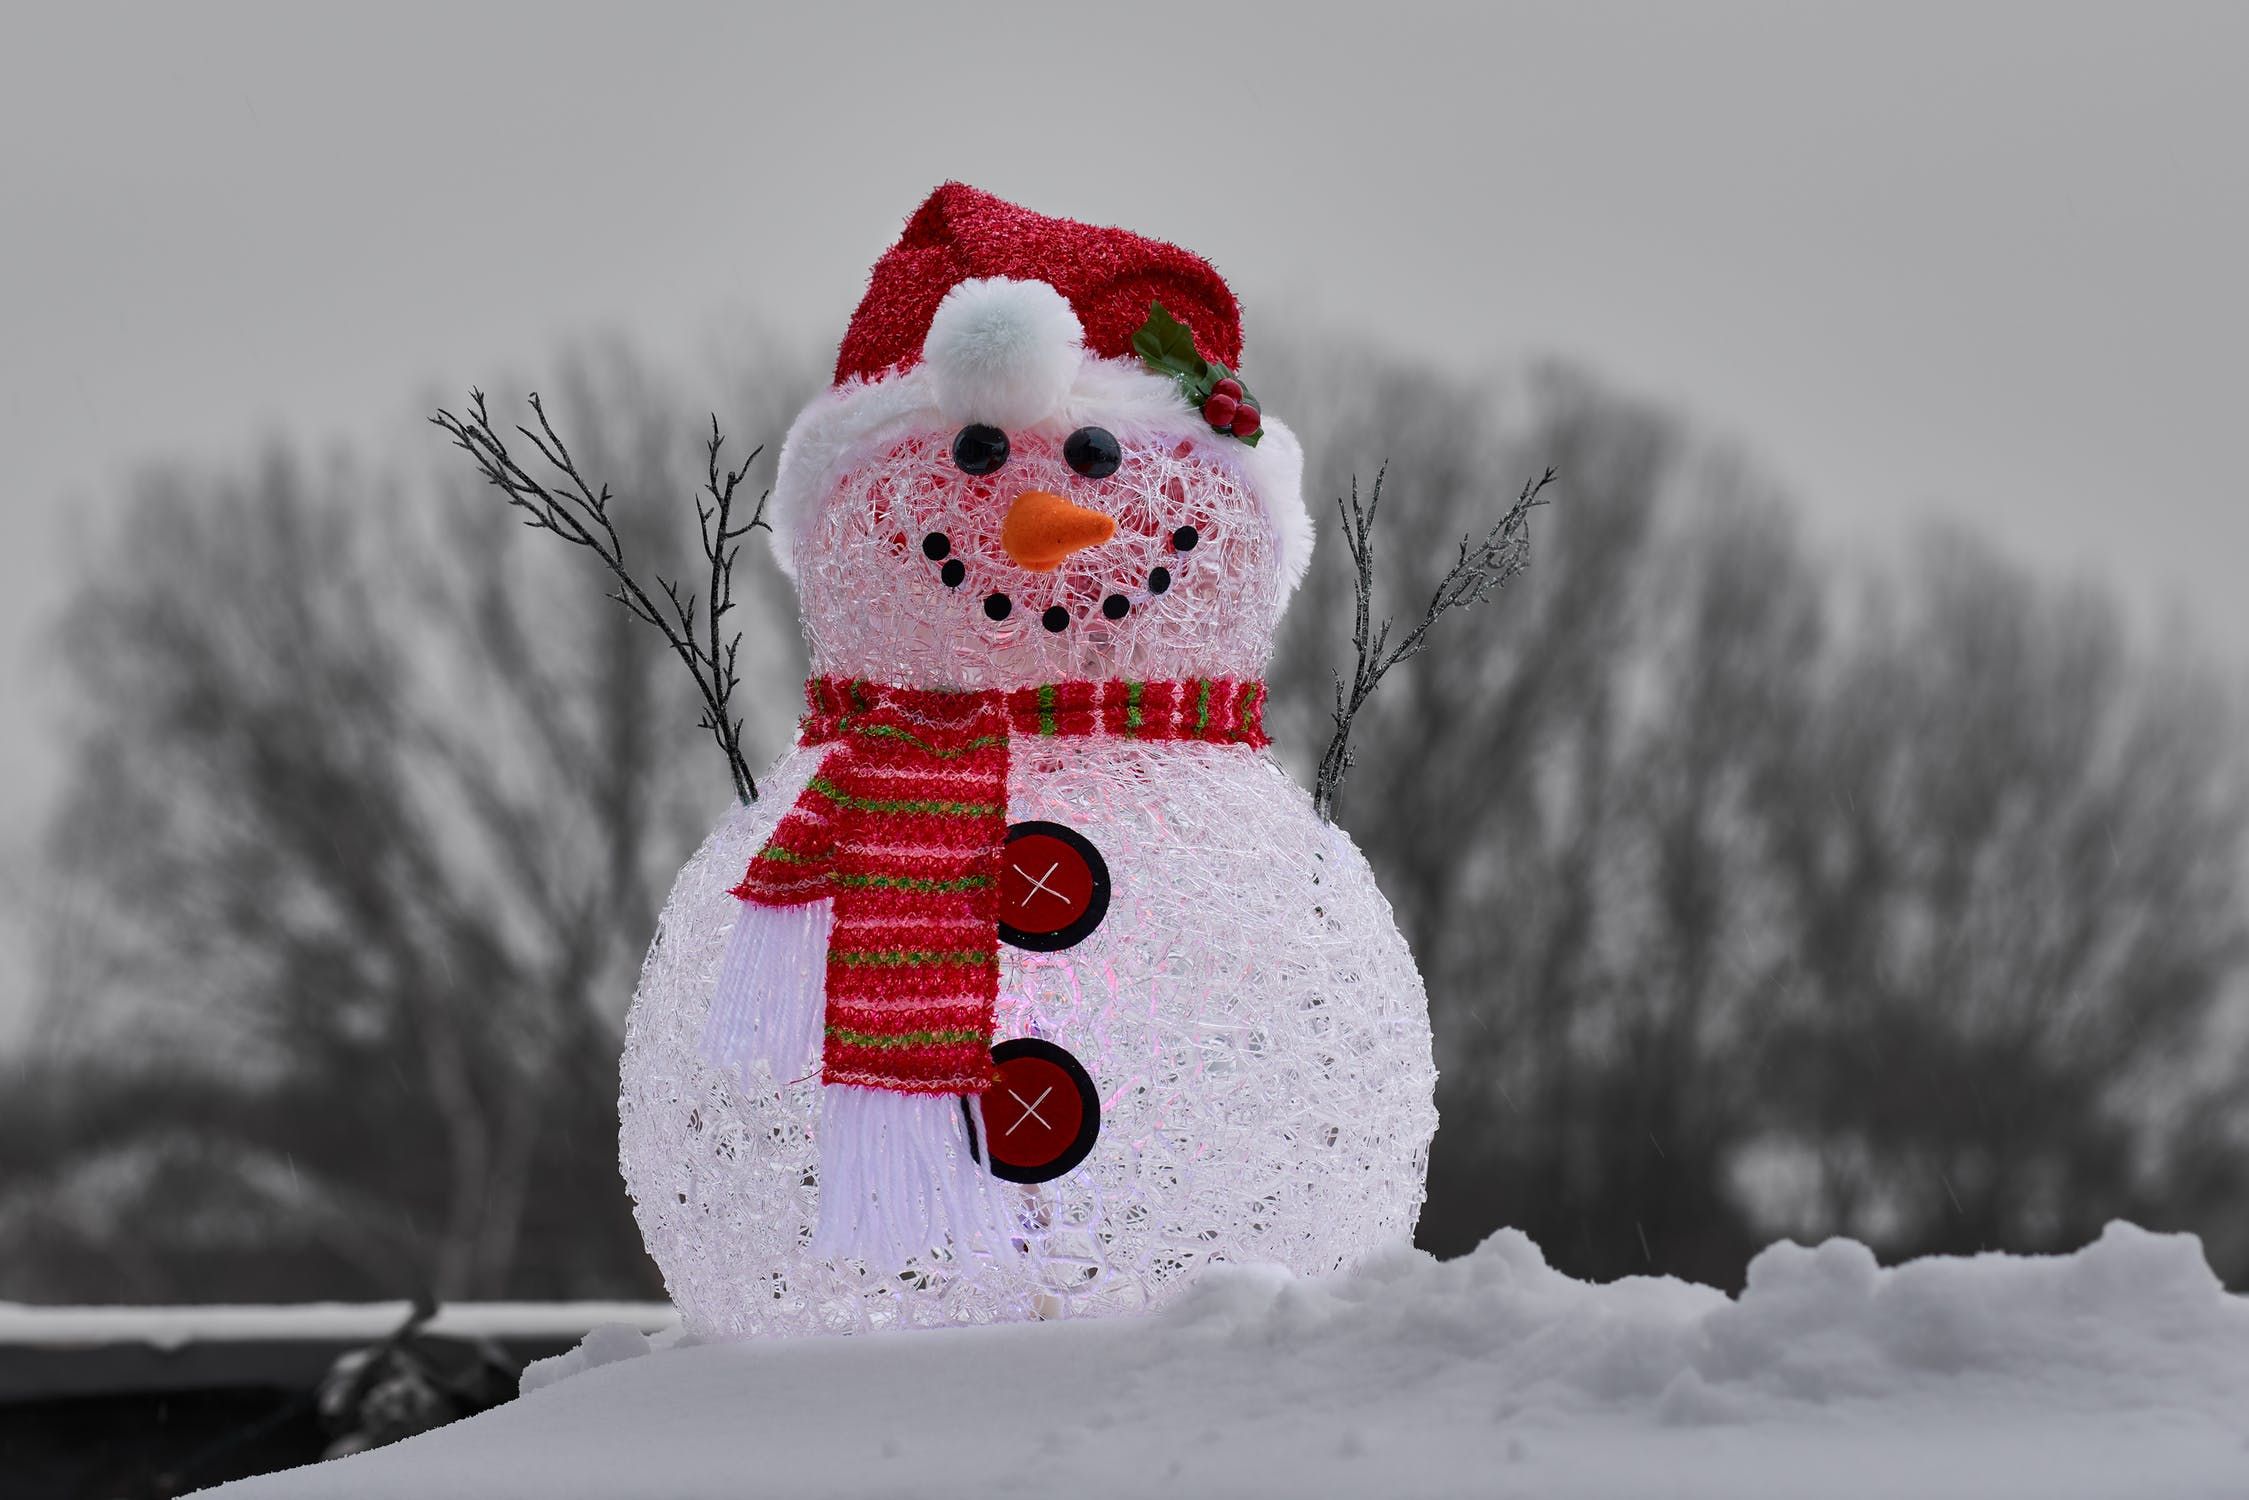 Handmade smiling snowman adorned with red clothings standing on a snow outside with blurred trees on the background